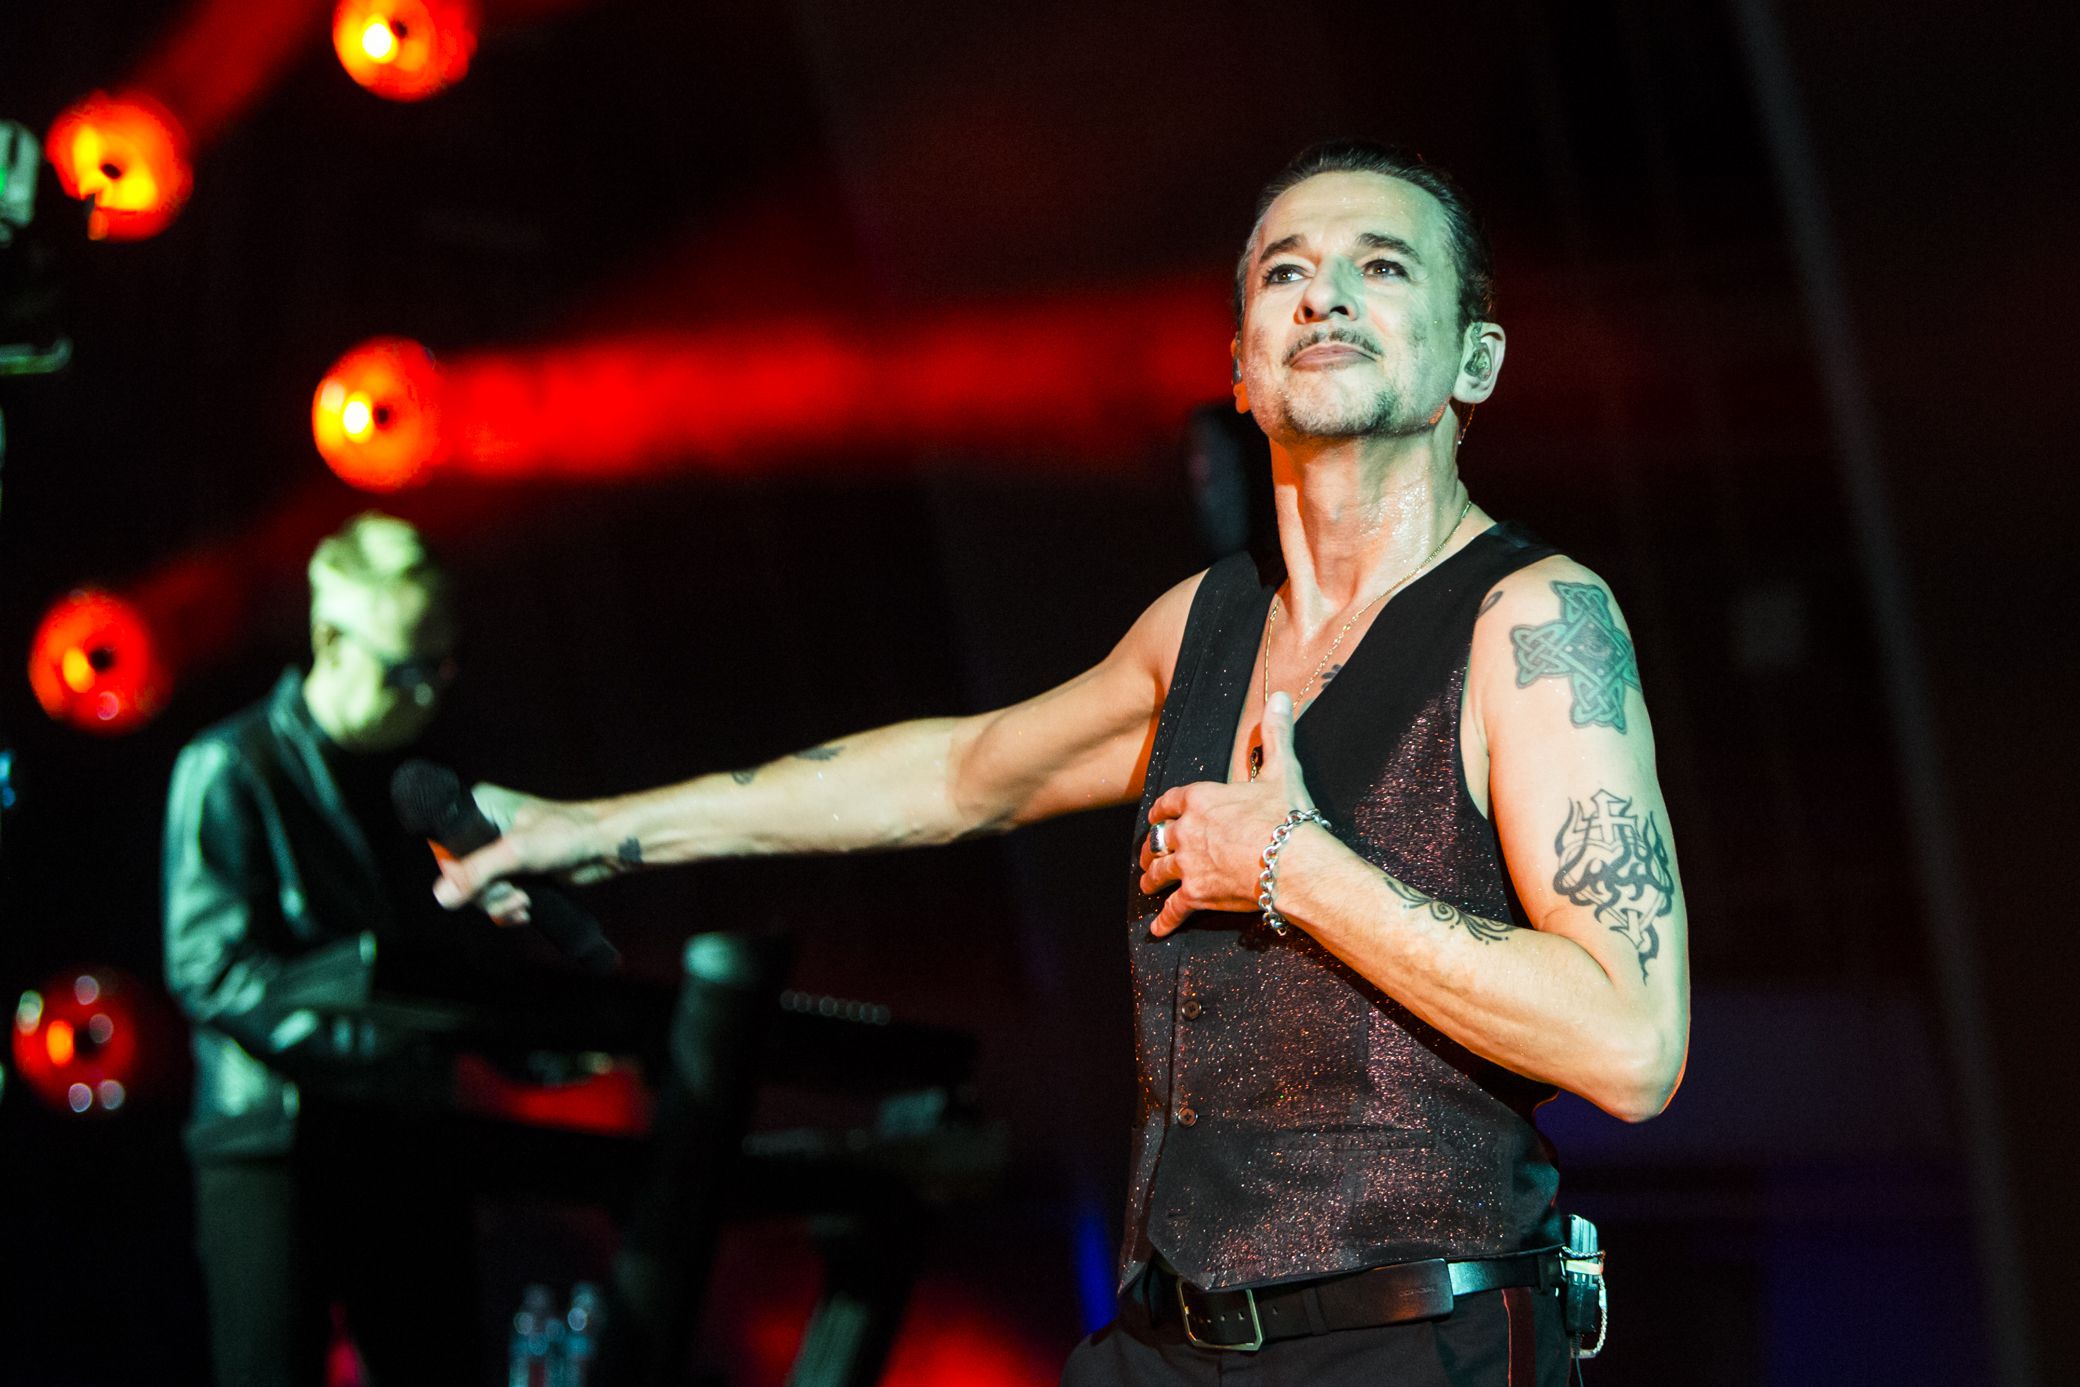 depeche mode 17 Live Review: Depeche Mode at the Hollywood Bowl (10/12)